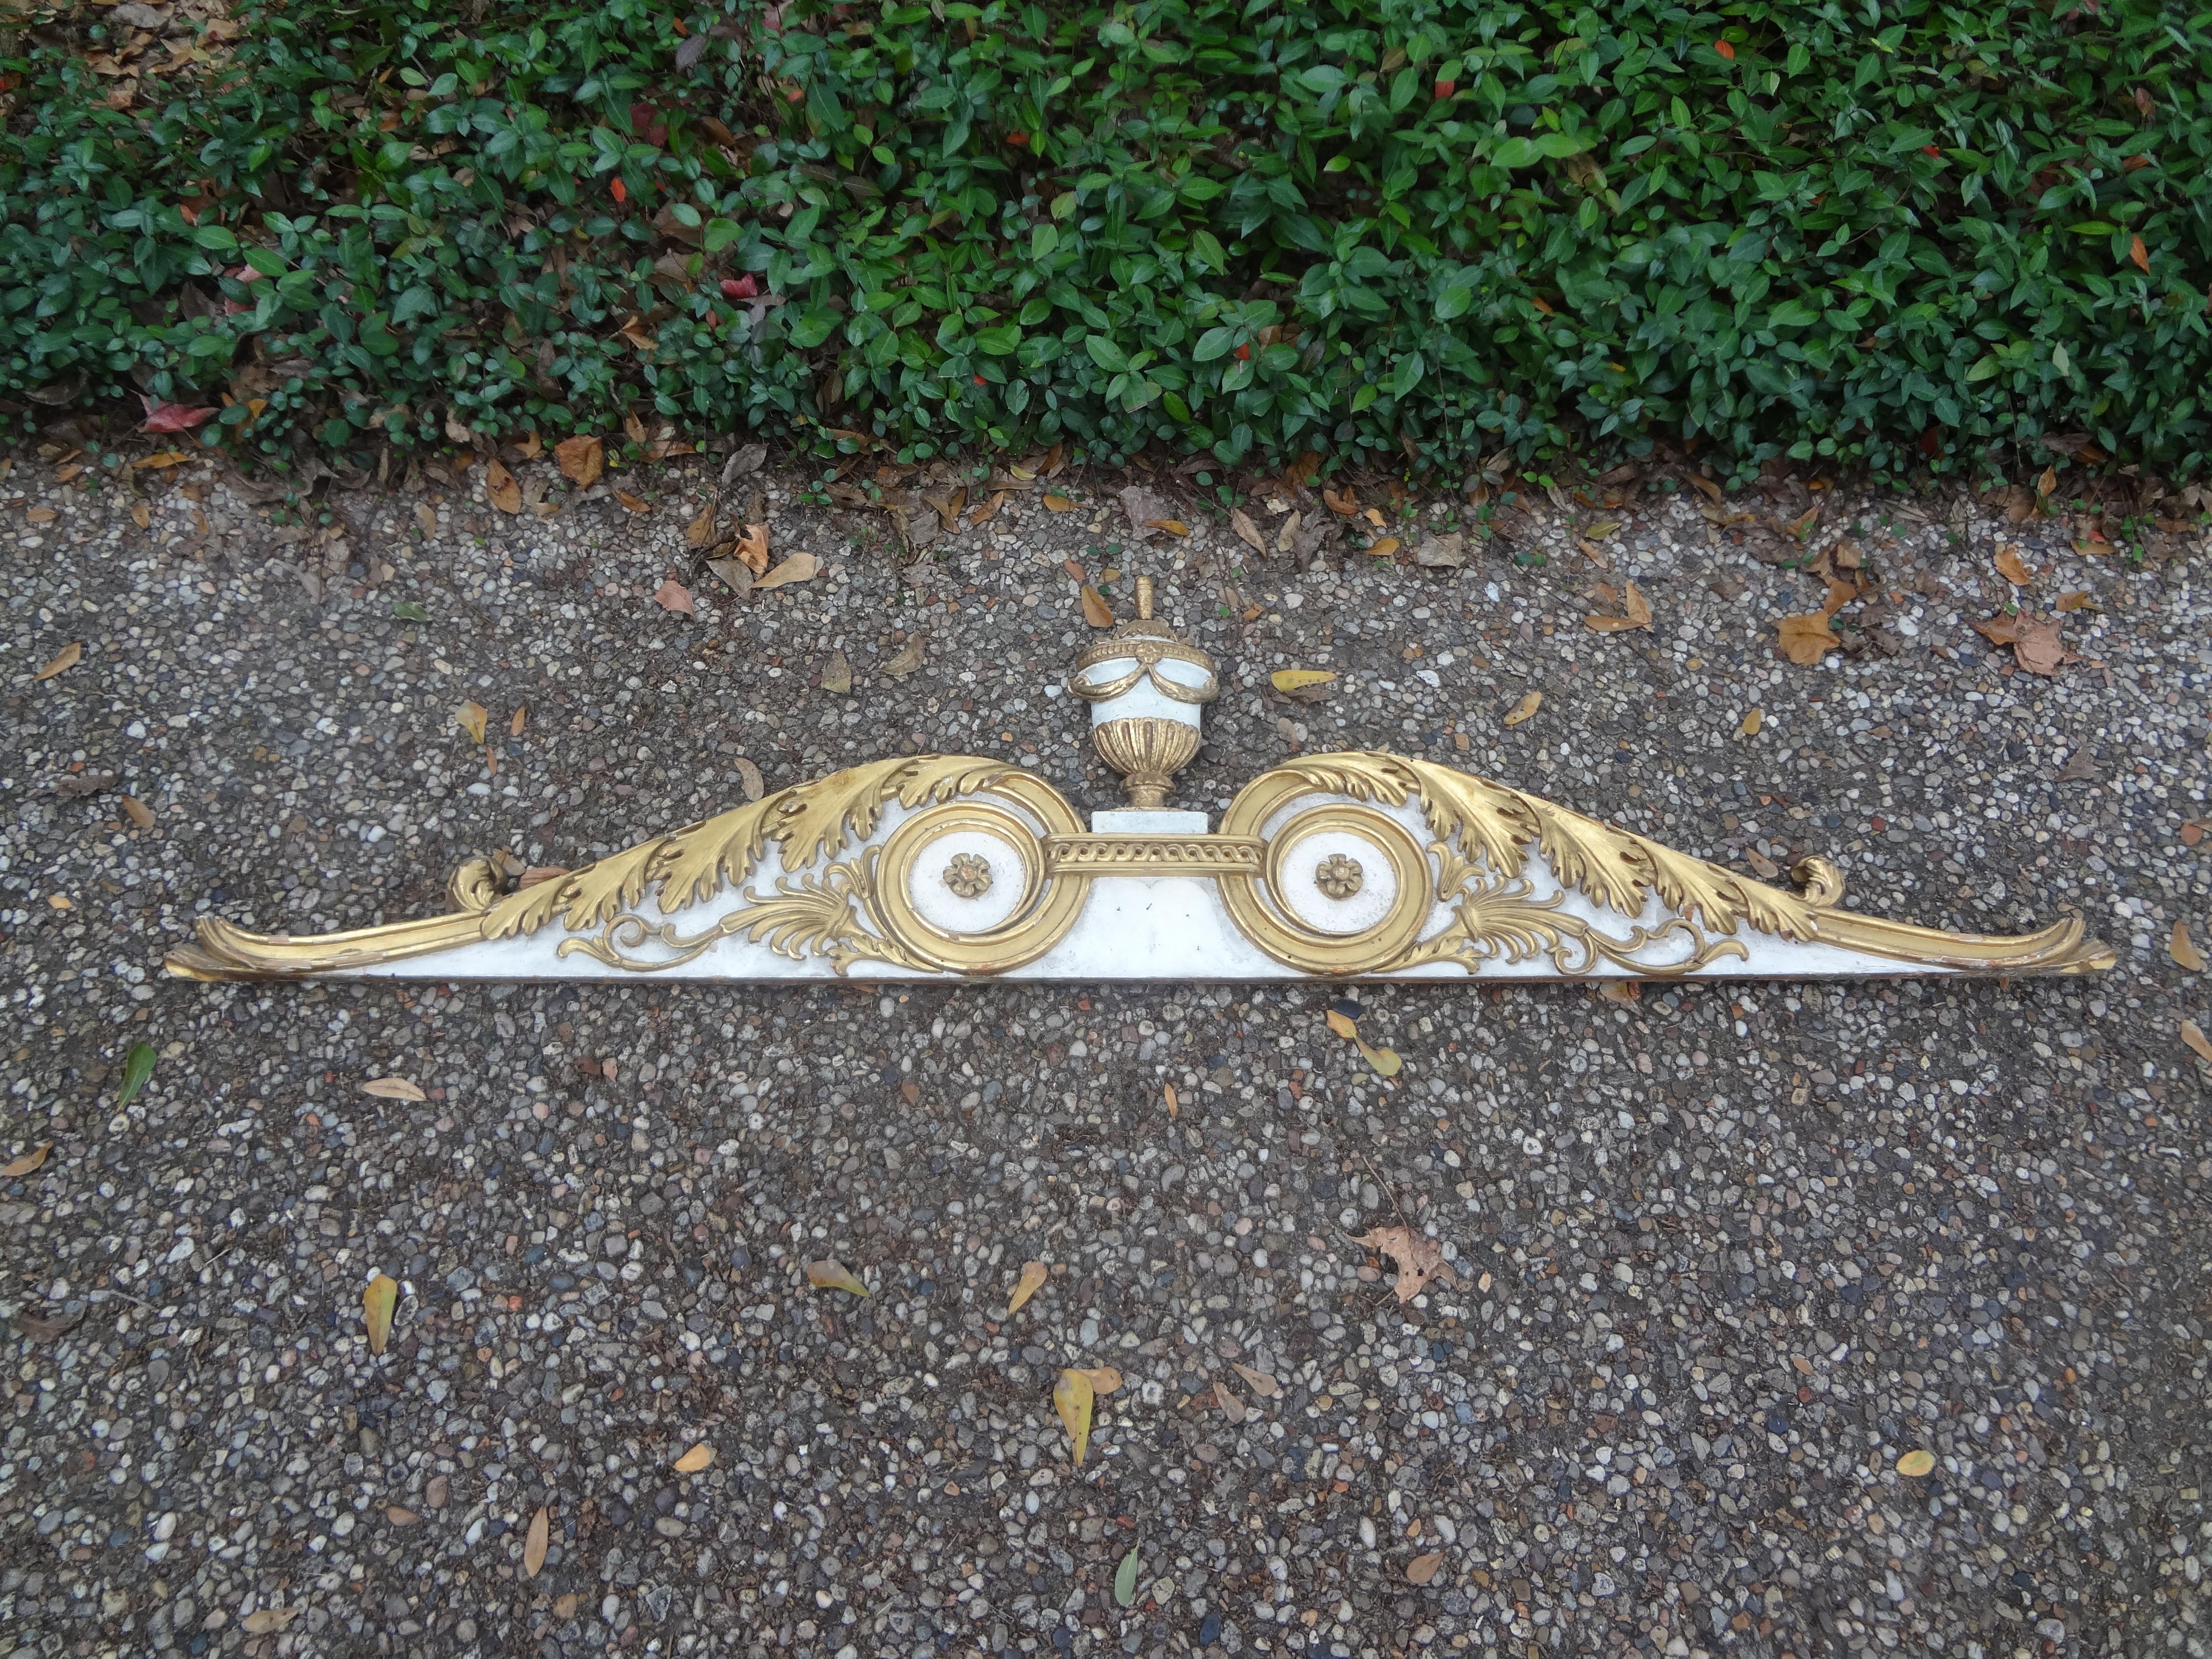 Stunning late 18th-early 19th century Italian painted and parcel carved giltwood architectural over door, architectural element or fragment. A great decorative piece with beautiful patina!.